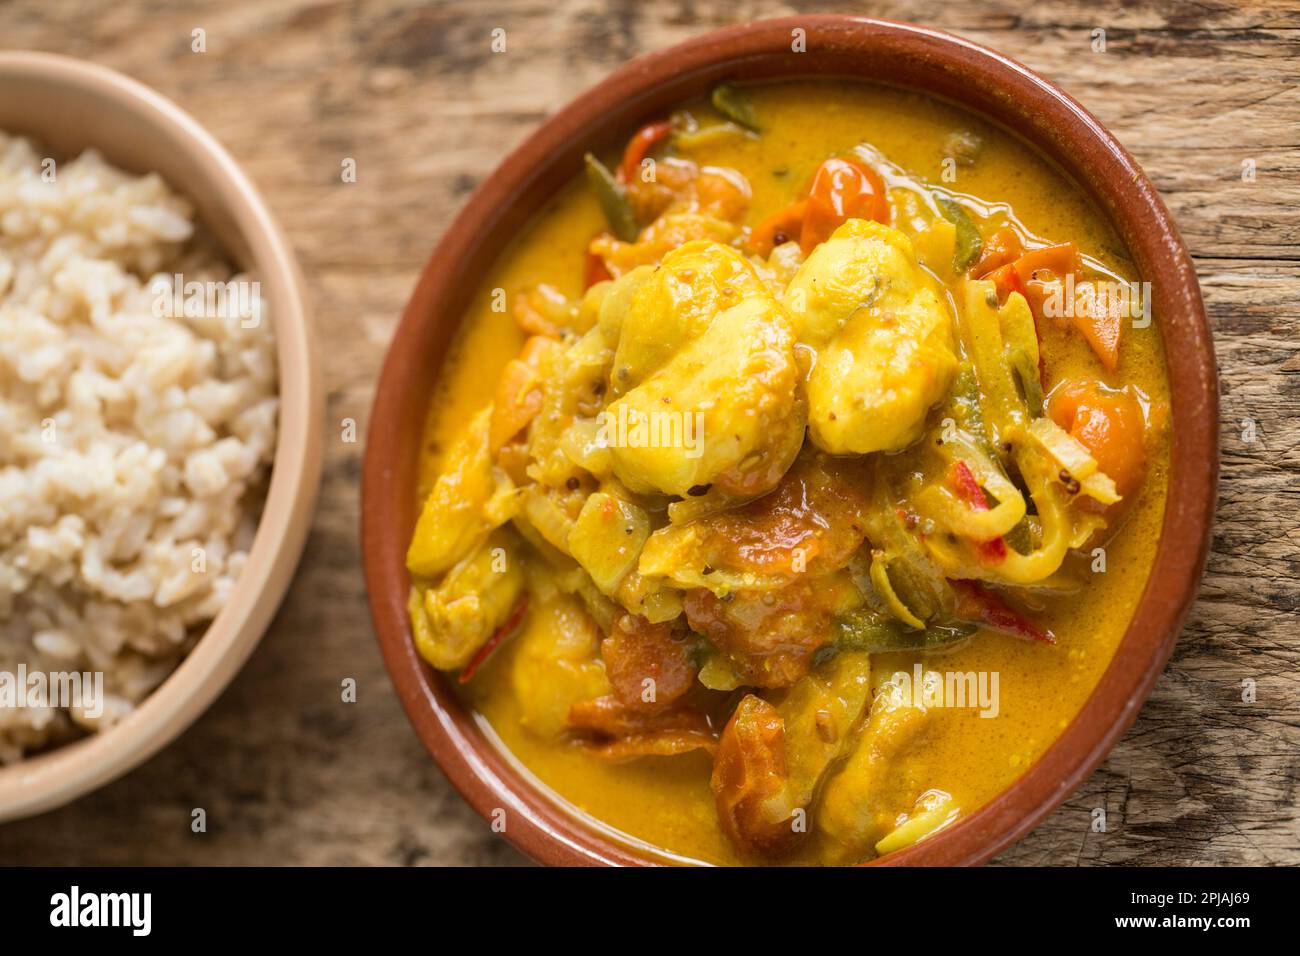 A homemade fish curry made with thornback ray cheeks and including coconut milk, chillies, tomatoes and spices. England UK GB Stock Photo